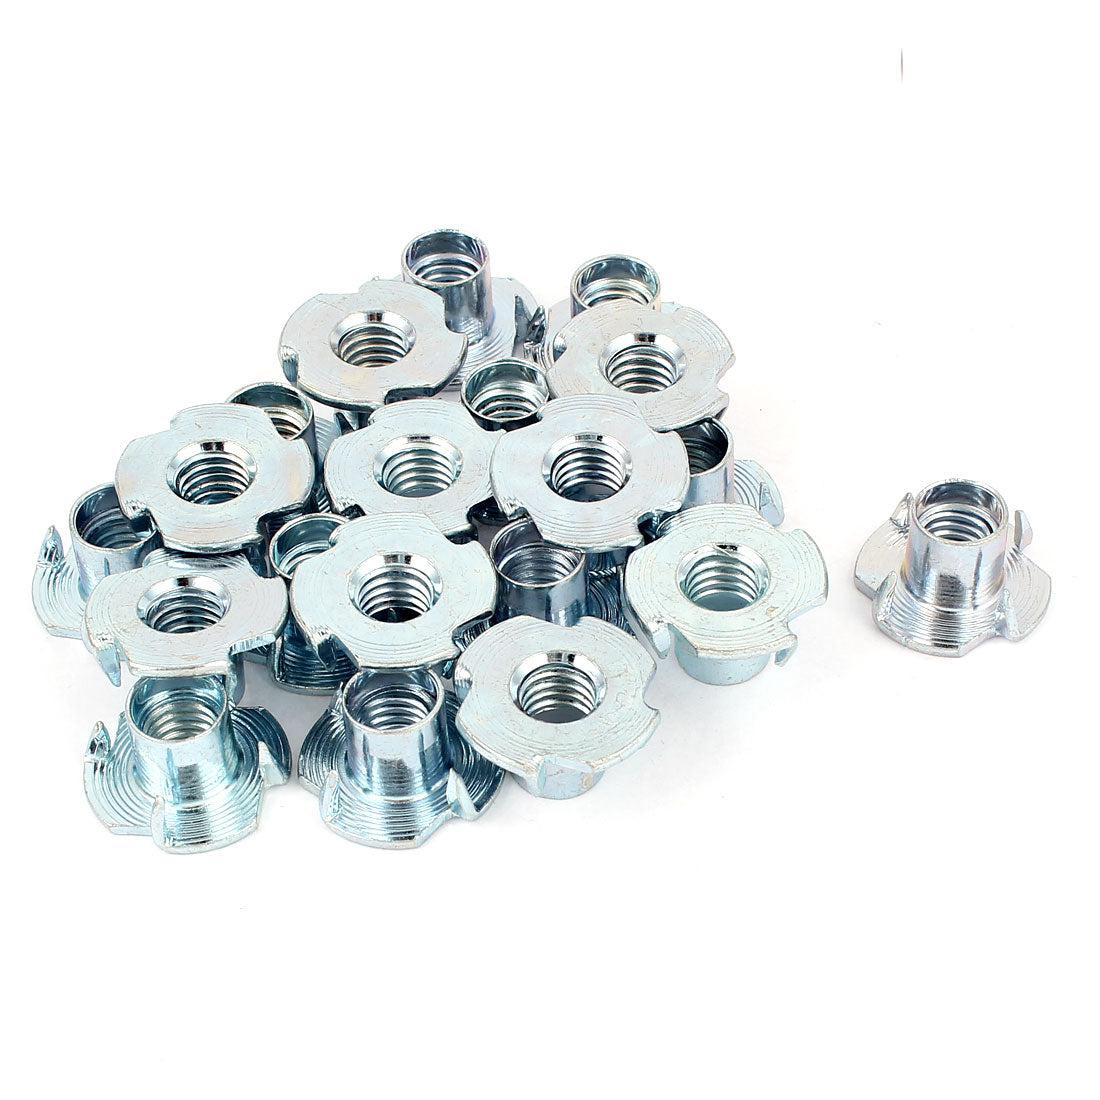 uxcell Uxcell 20 Pcs Half Thread 4 Prongs Zinc Plated T-Nut Tee Nut Fixing 3/8"-16 x 1/2"